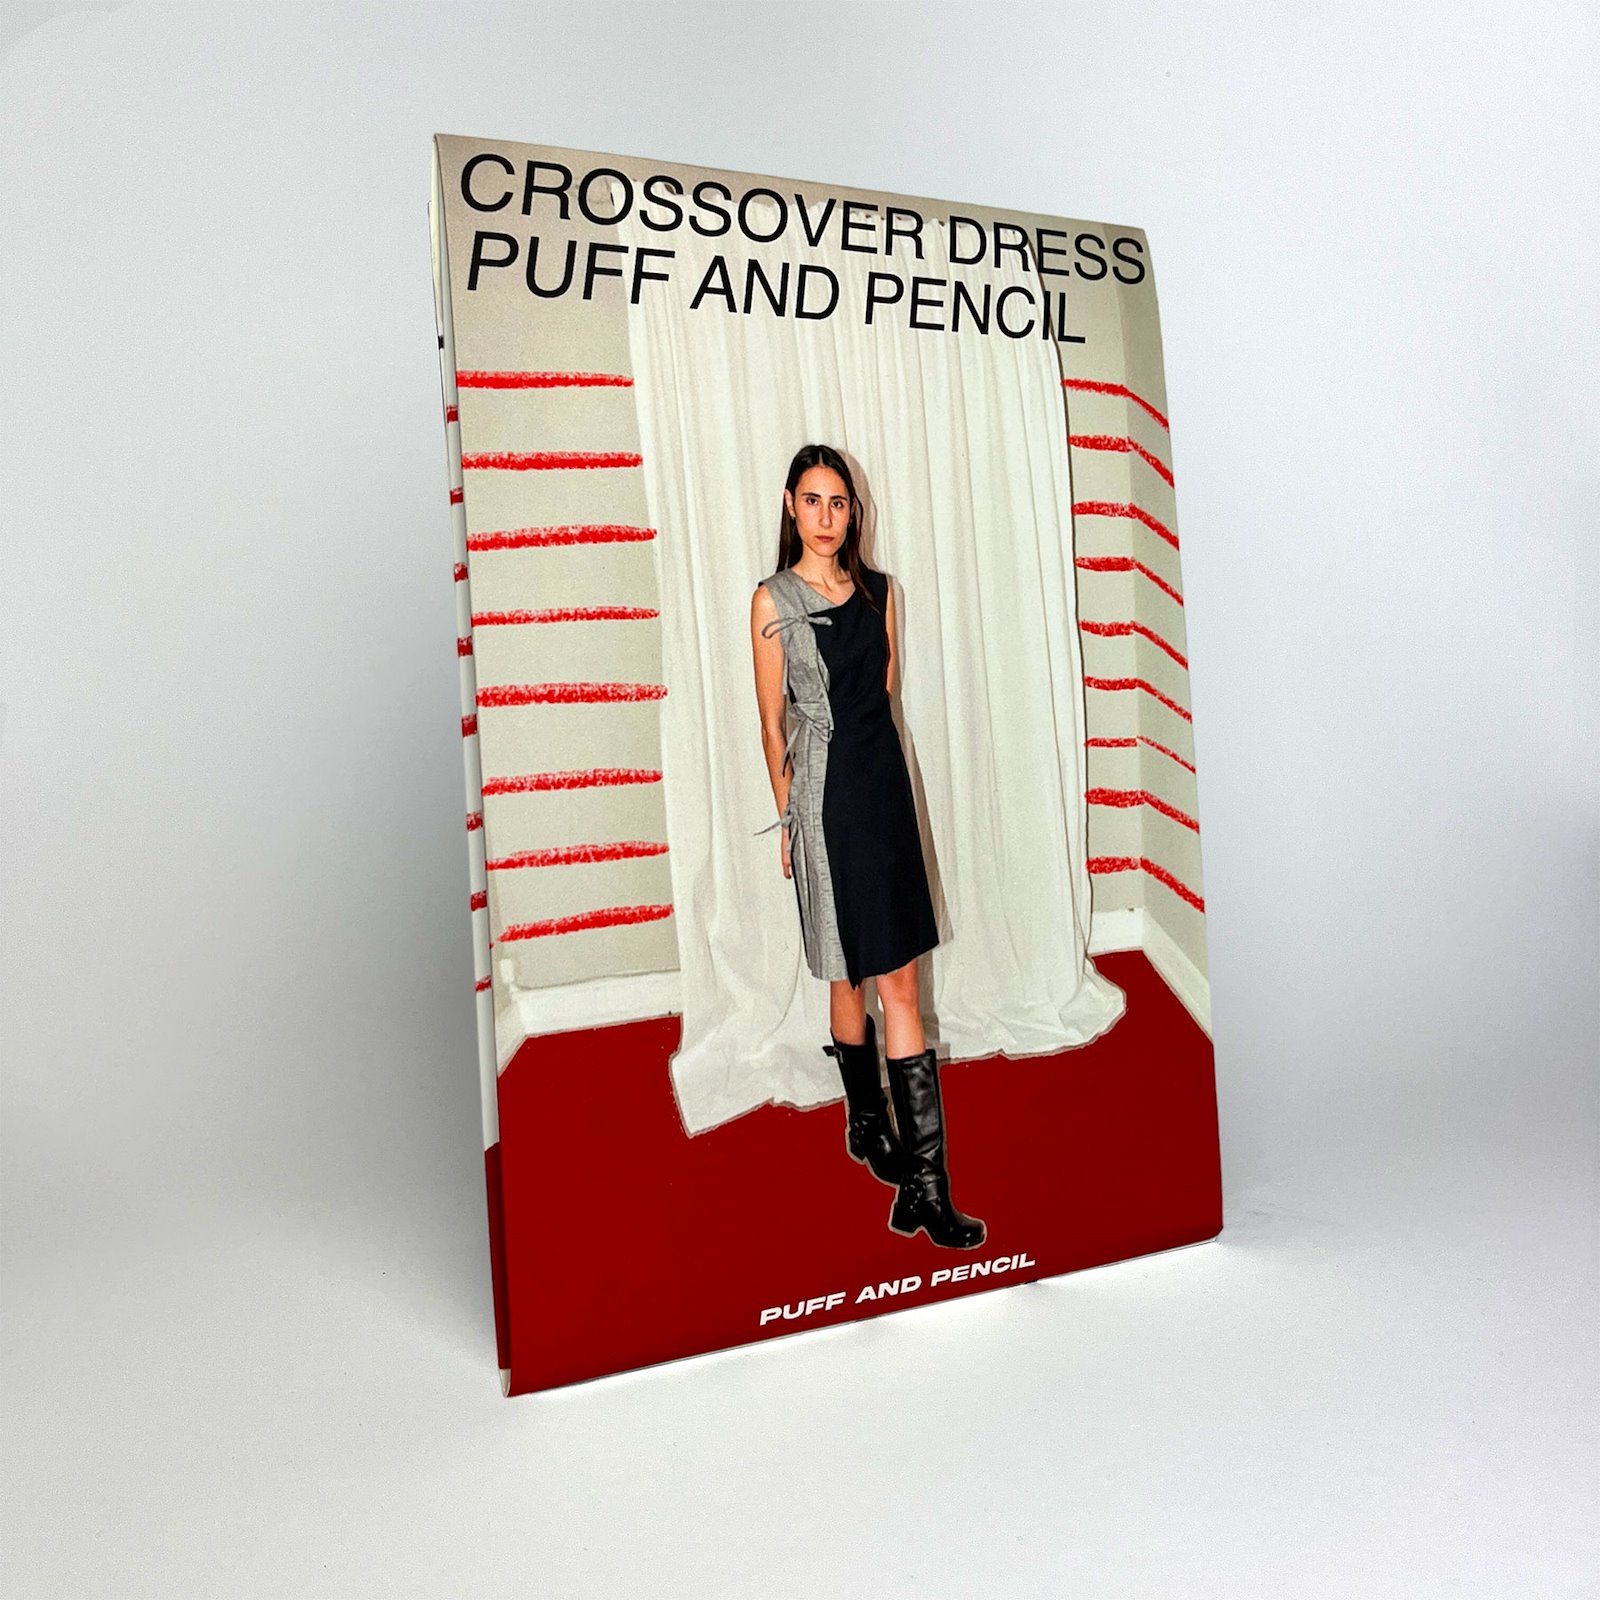 Puff and Pencil Schnittmuster "Crossover dress" 1100300_pack.jpg